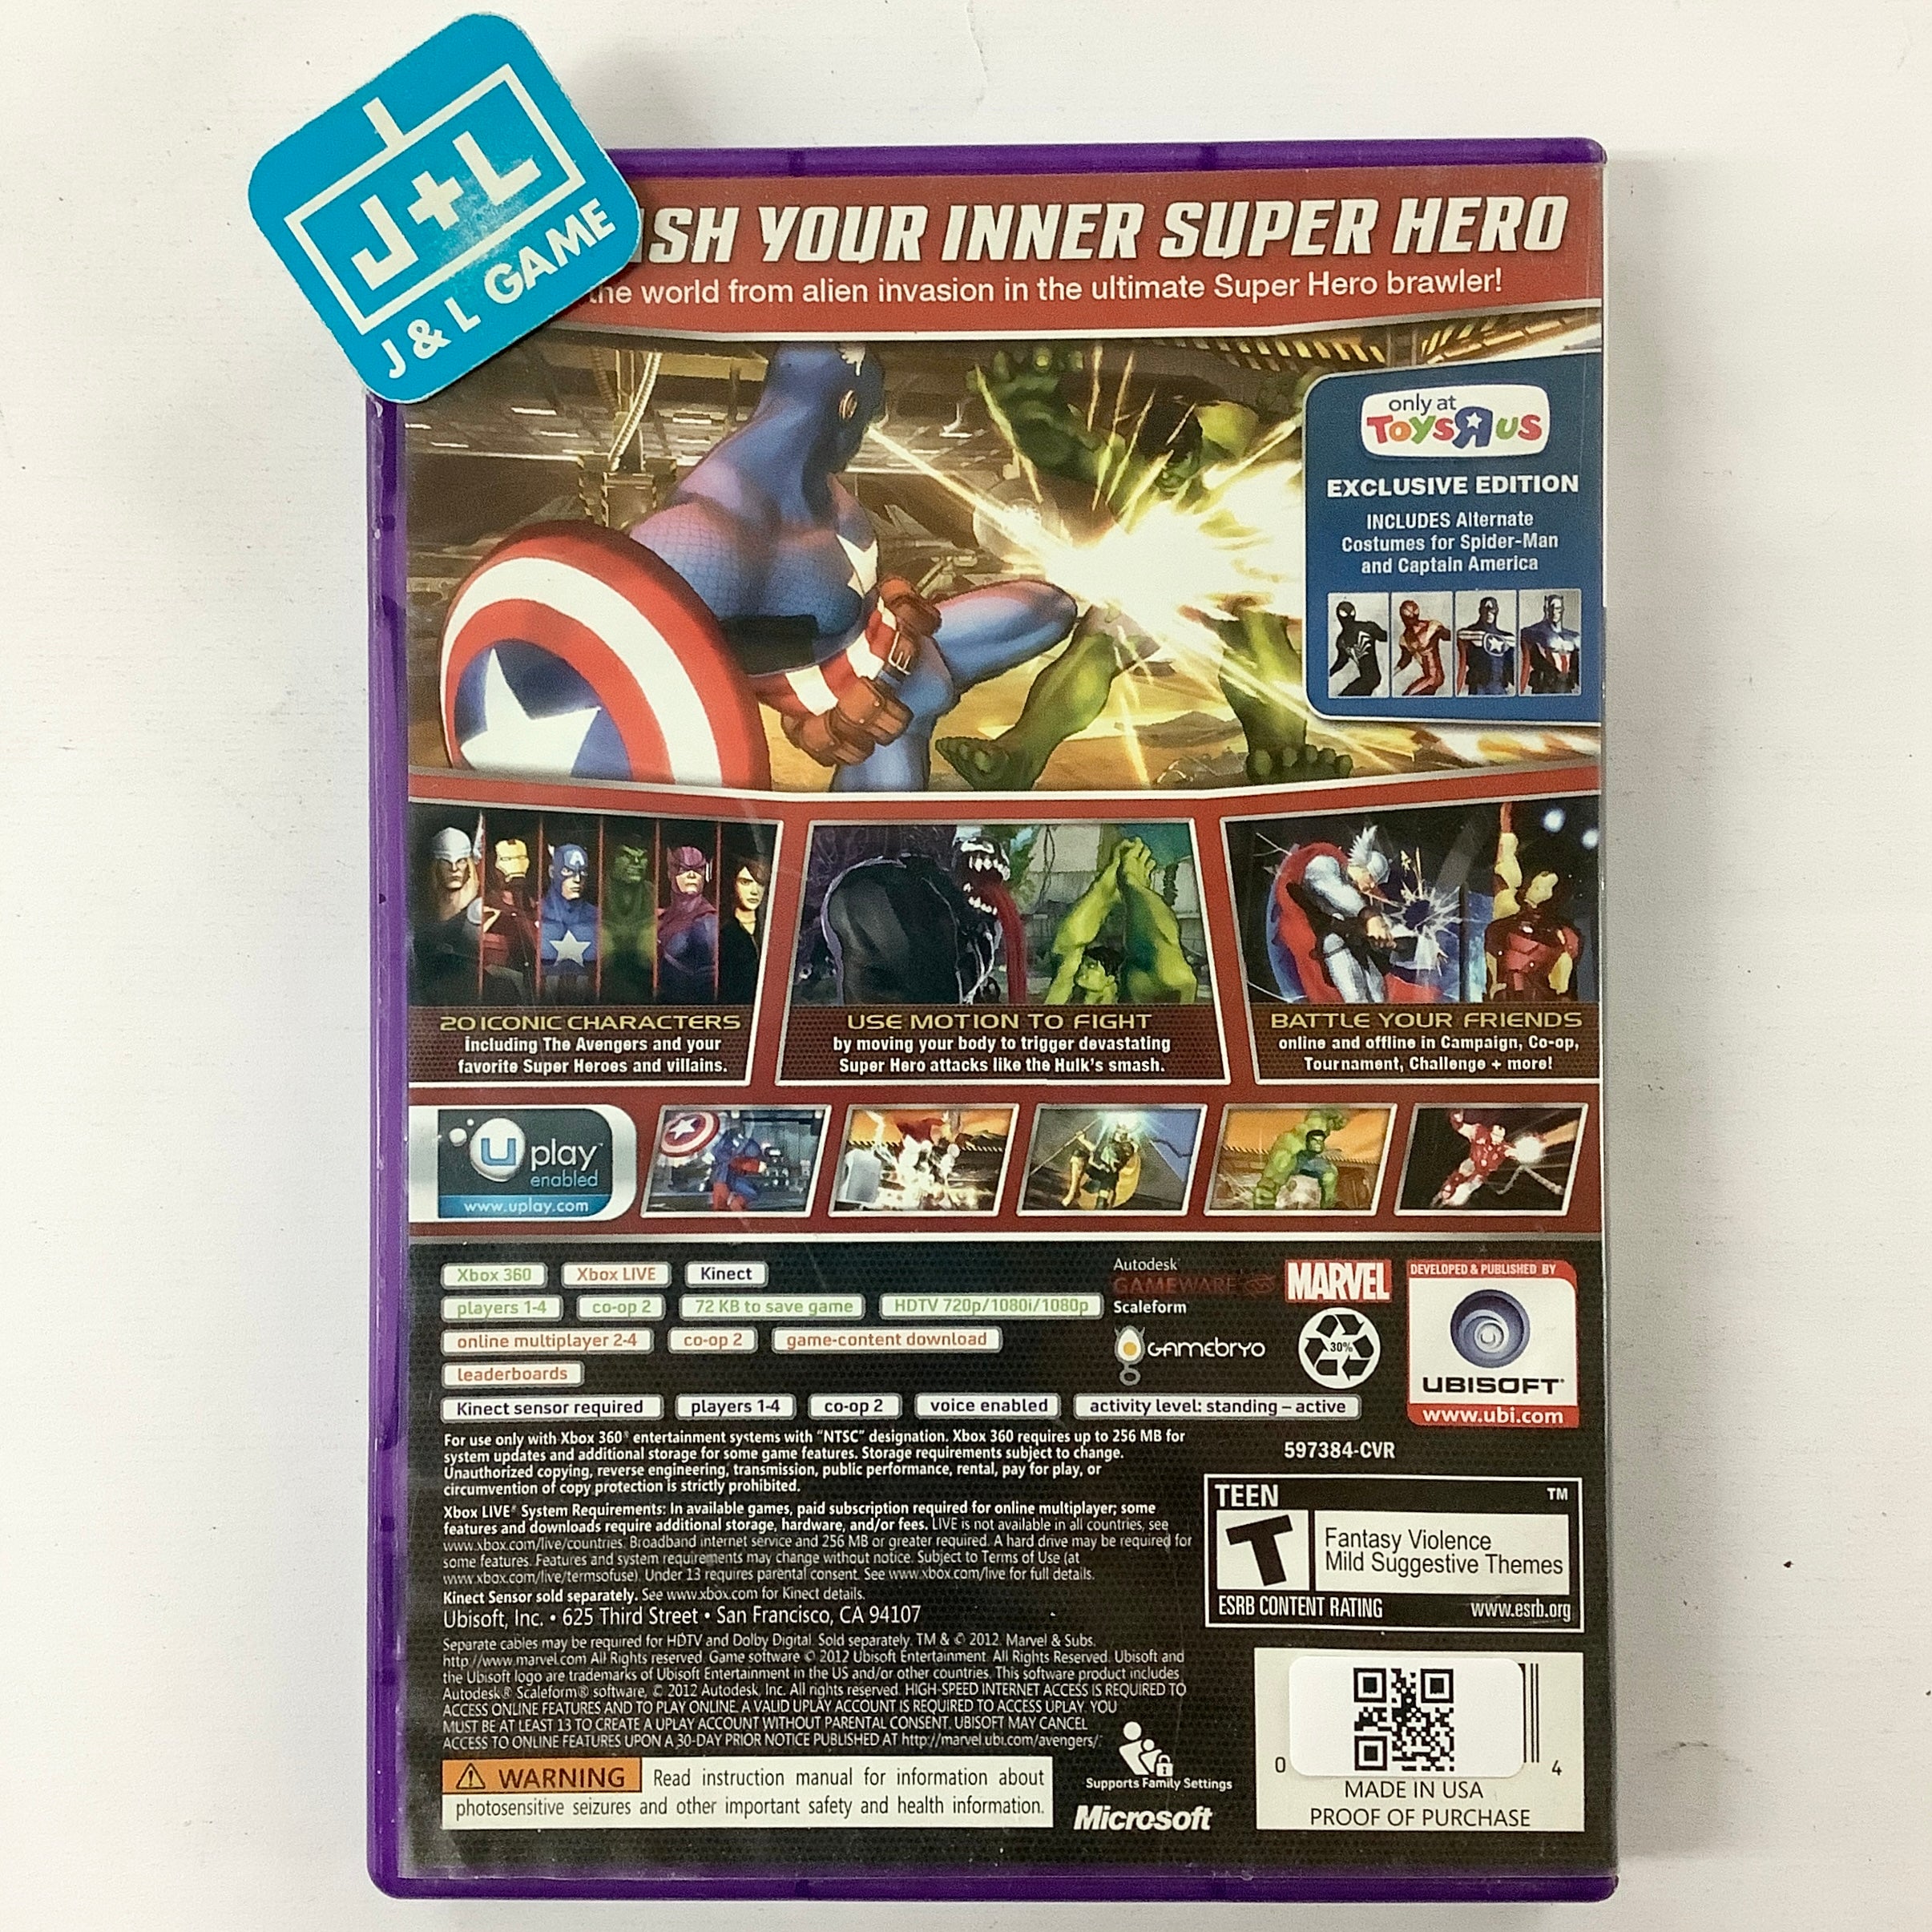 Marvel Avengers: Battle for Earth (Kinect Required) - Xbox 360 [Pre-Owned] Video Games Ubisoft   